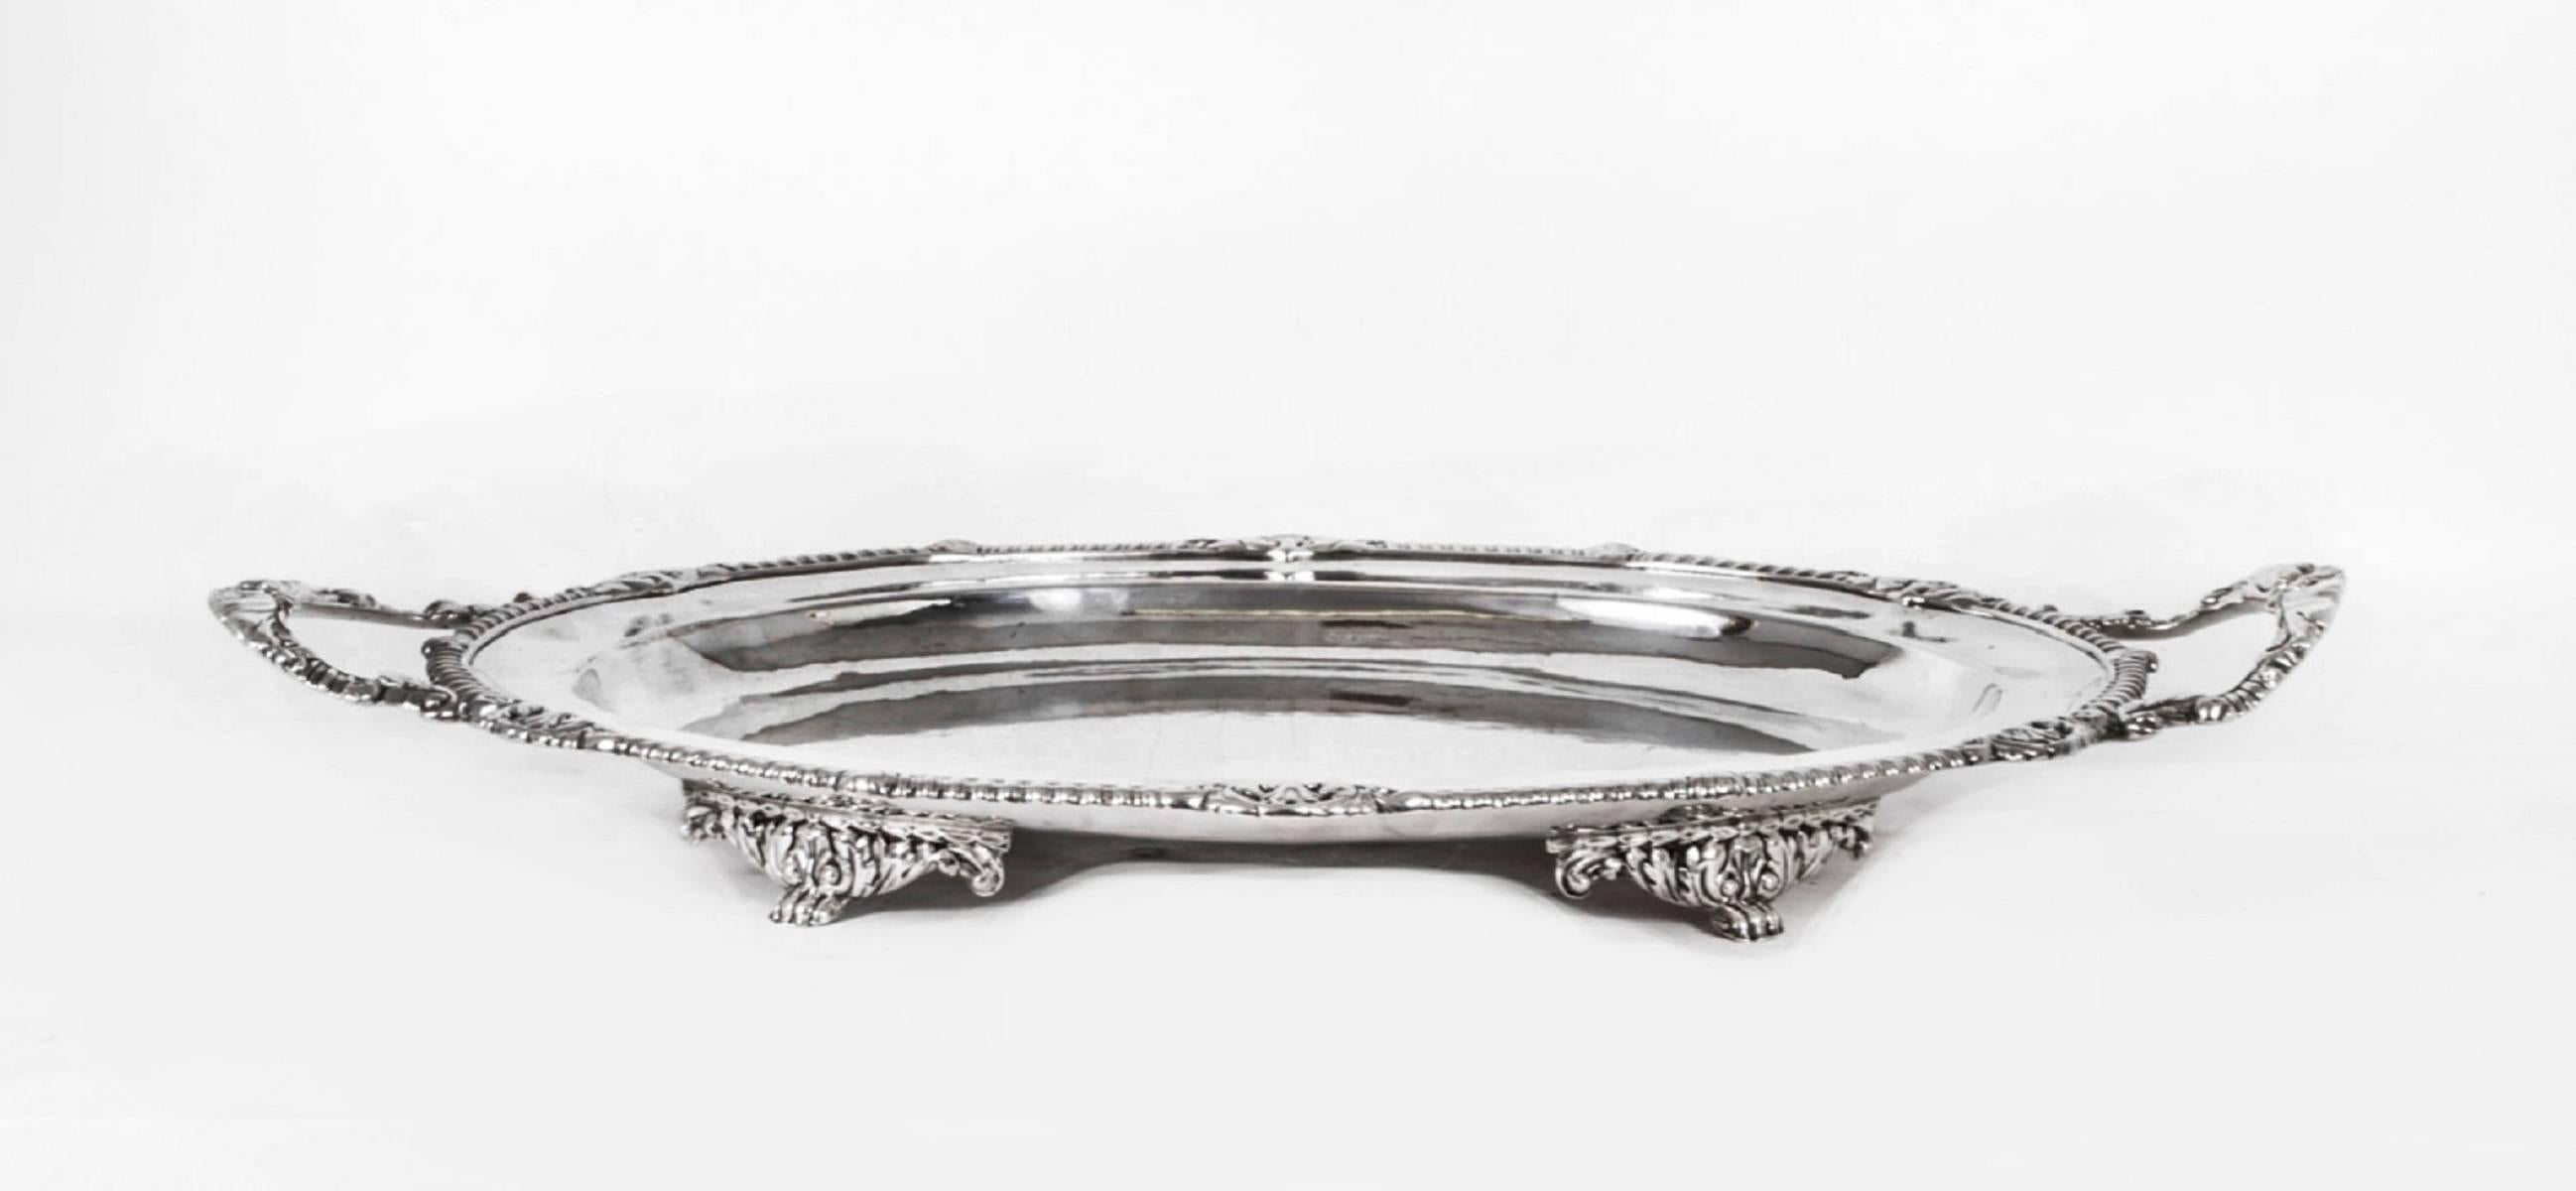 Antique Large Sterling Silver Tray by Paul Storr 1826 4